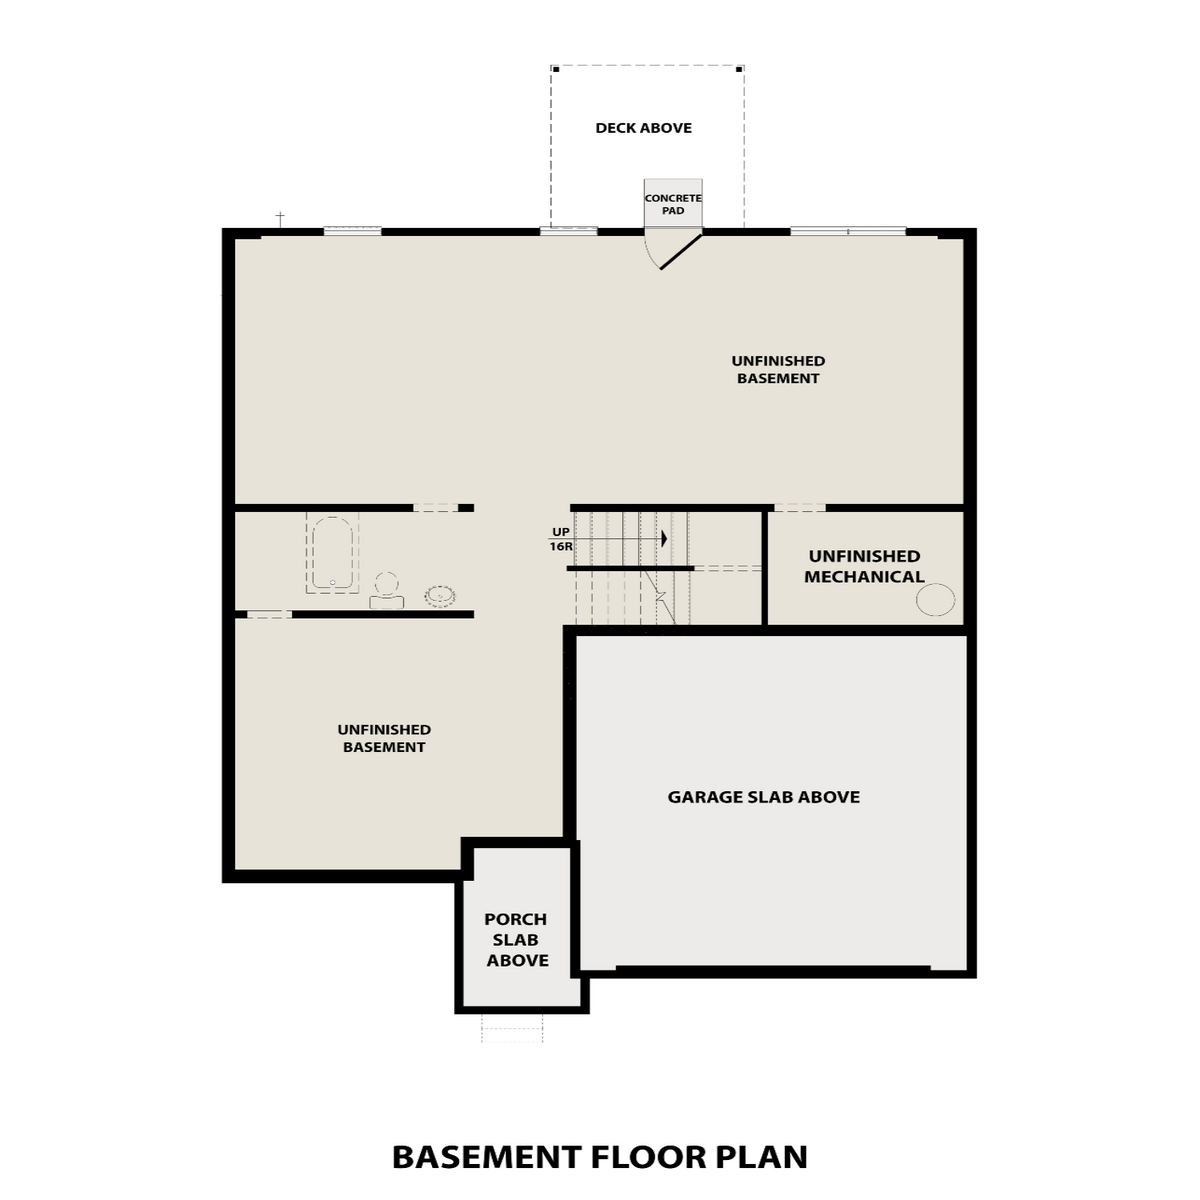 3 - The Hickory B- Unfinished Basement  floor plan layout for 93 Laurelwood Lane in Davidson Homes' Riverwood community.